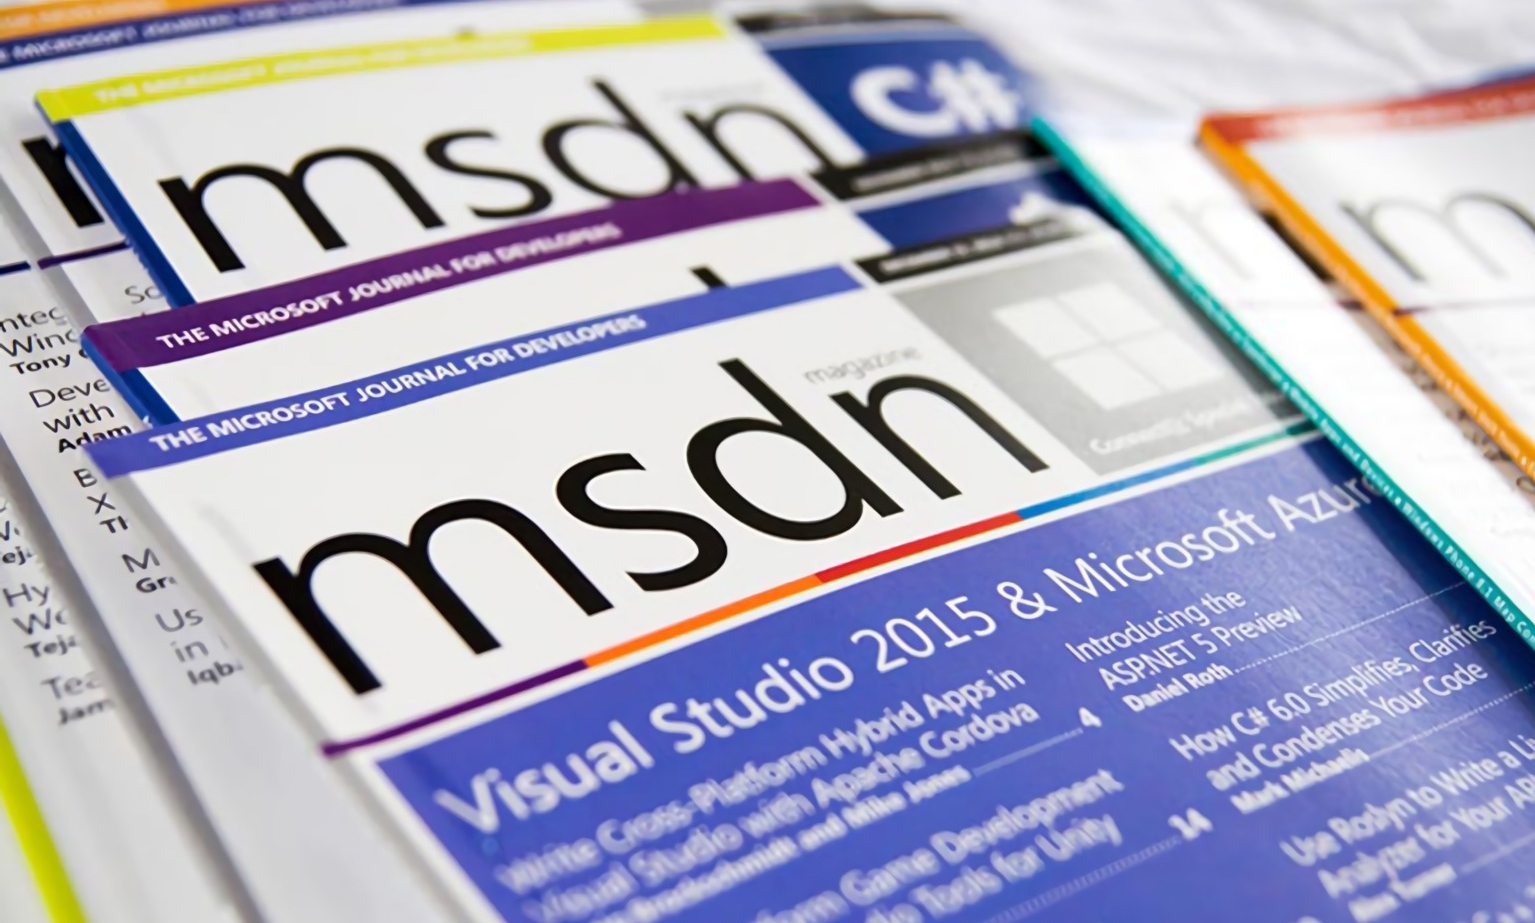 MSDN Magazine to end publication after 30+ year run